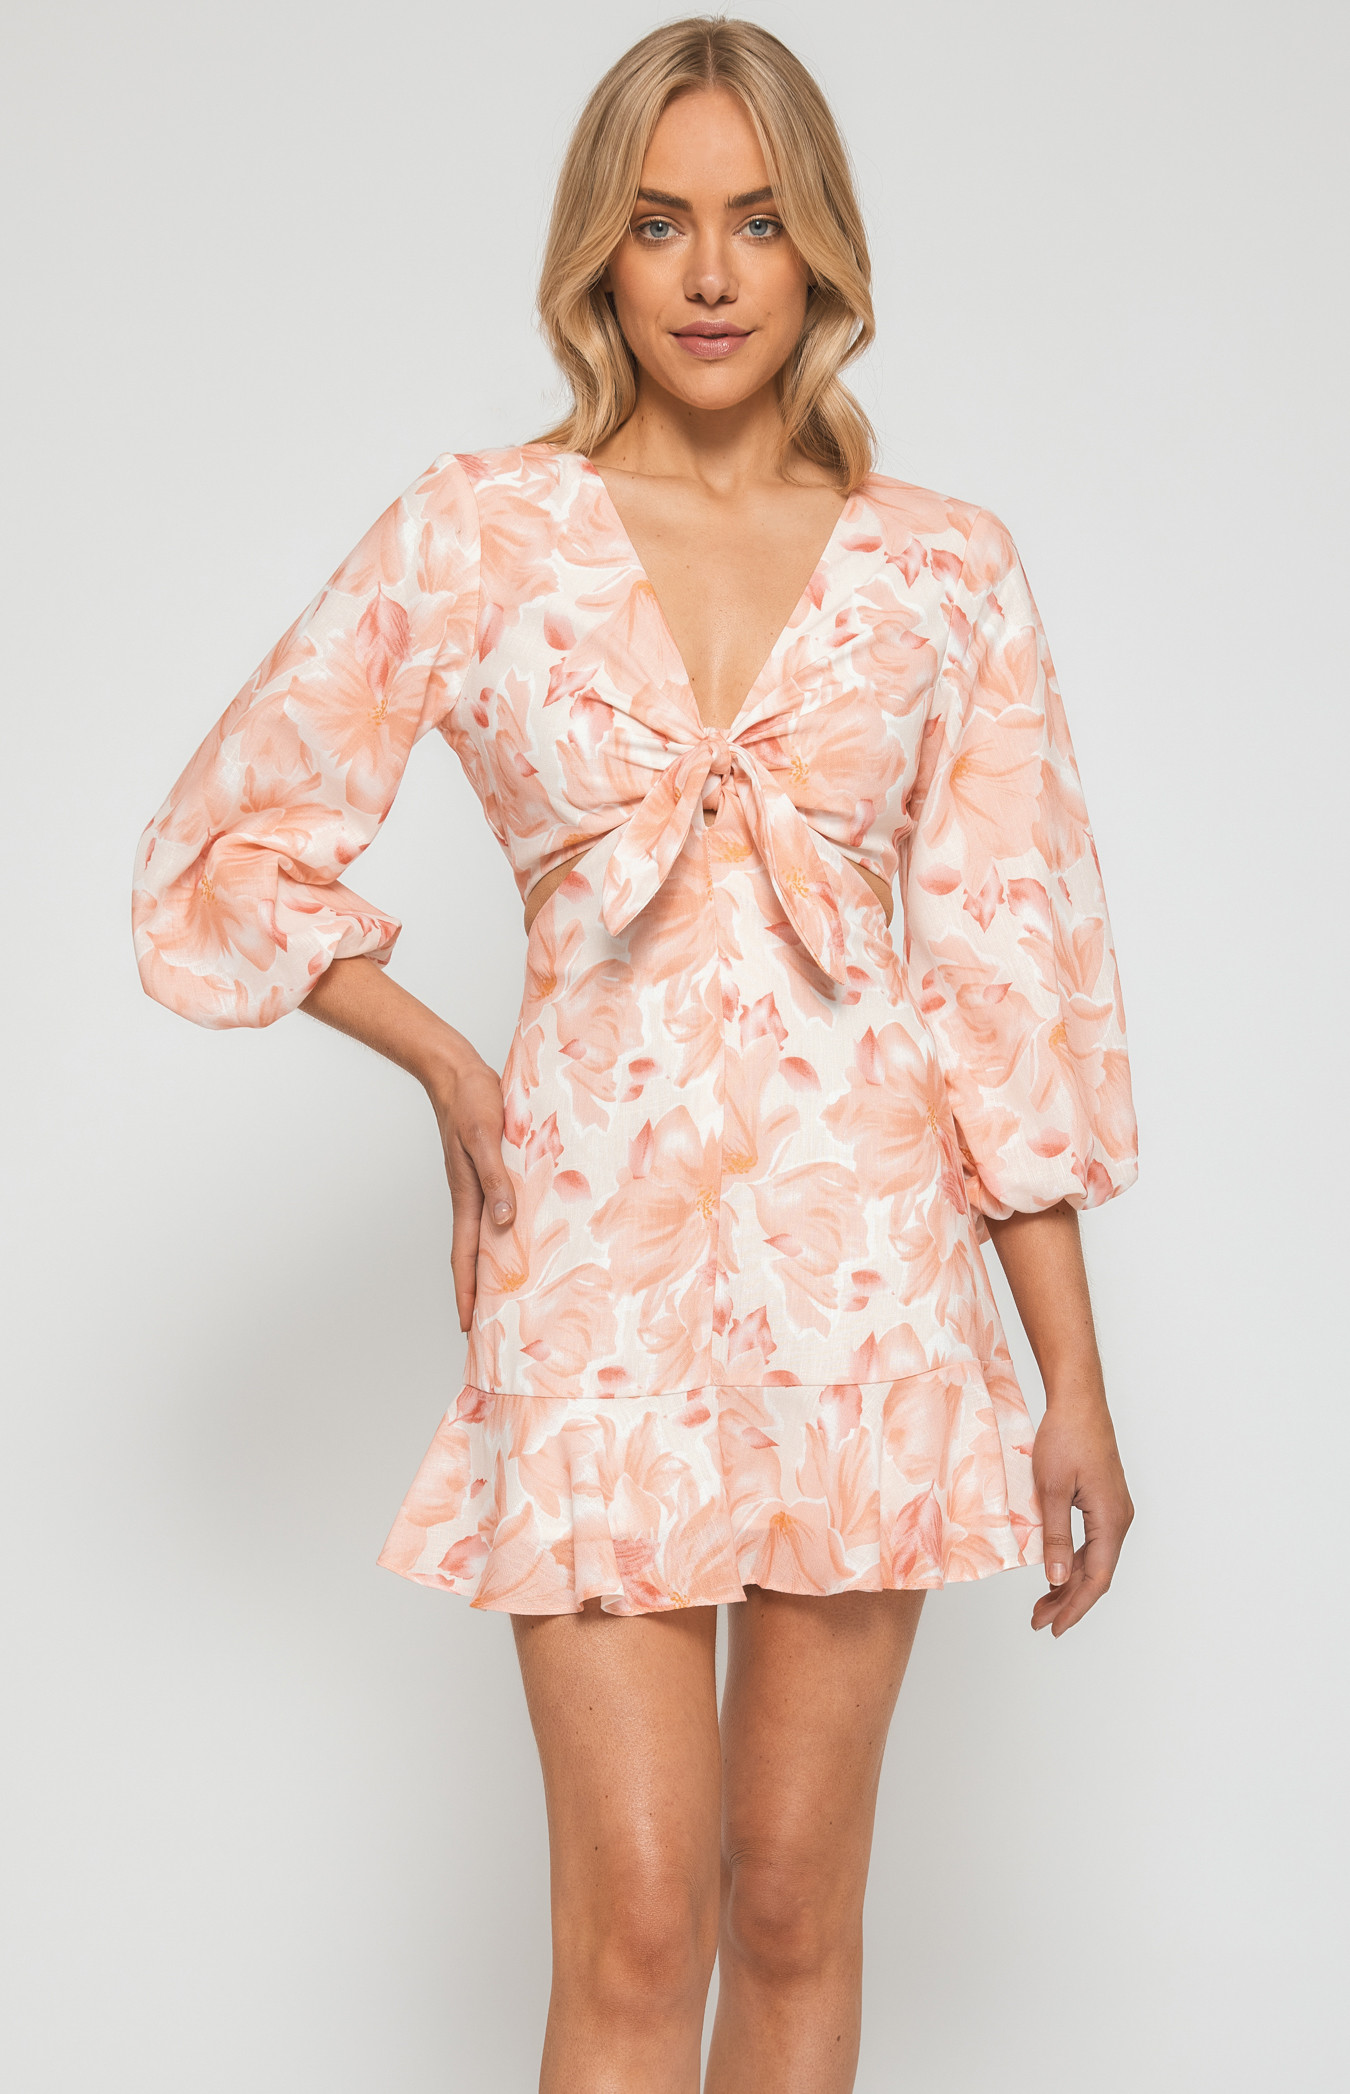 Floral Dress with Front Tie and Cut Out Details (WDR499A)